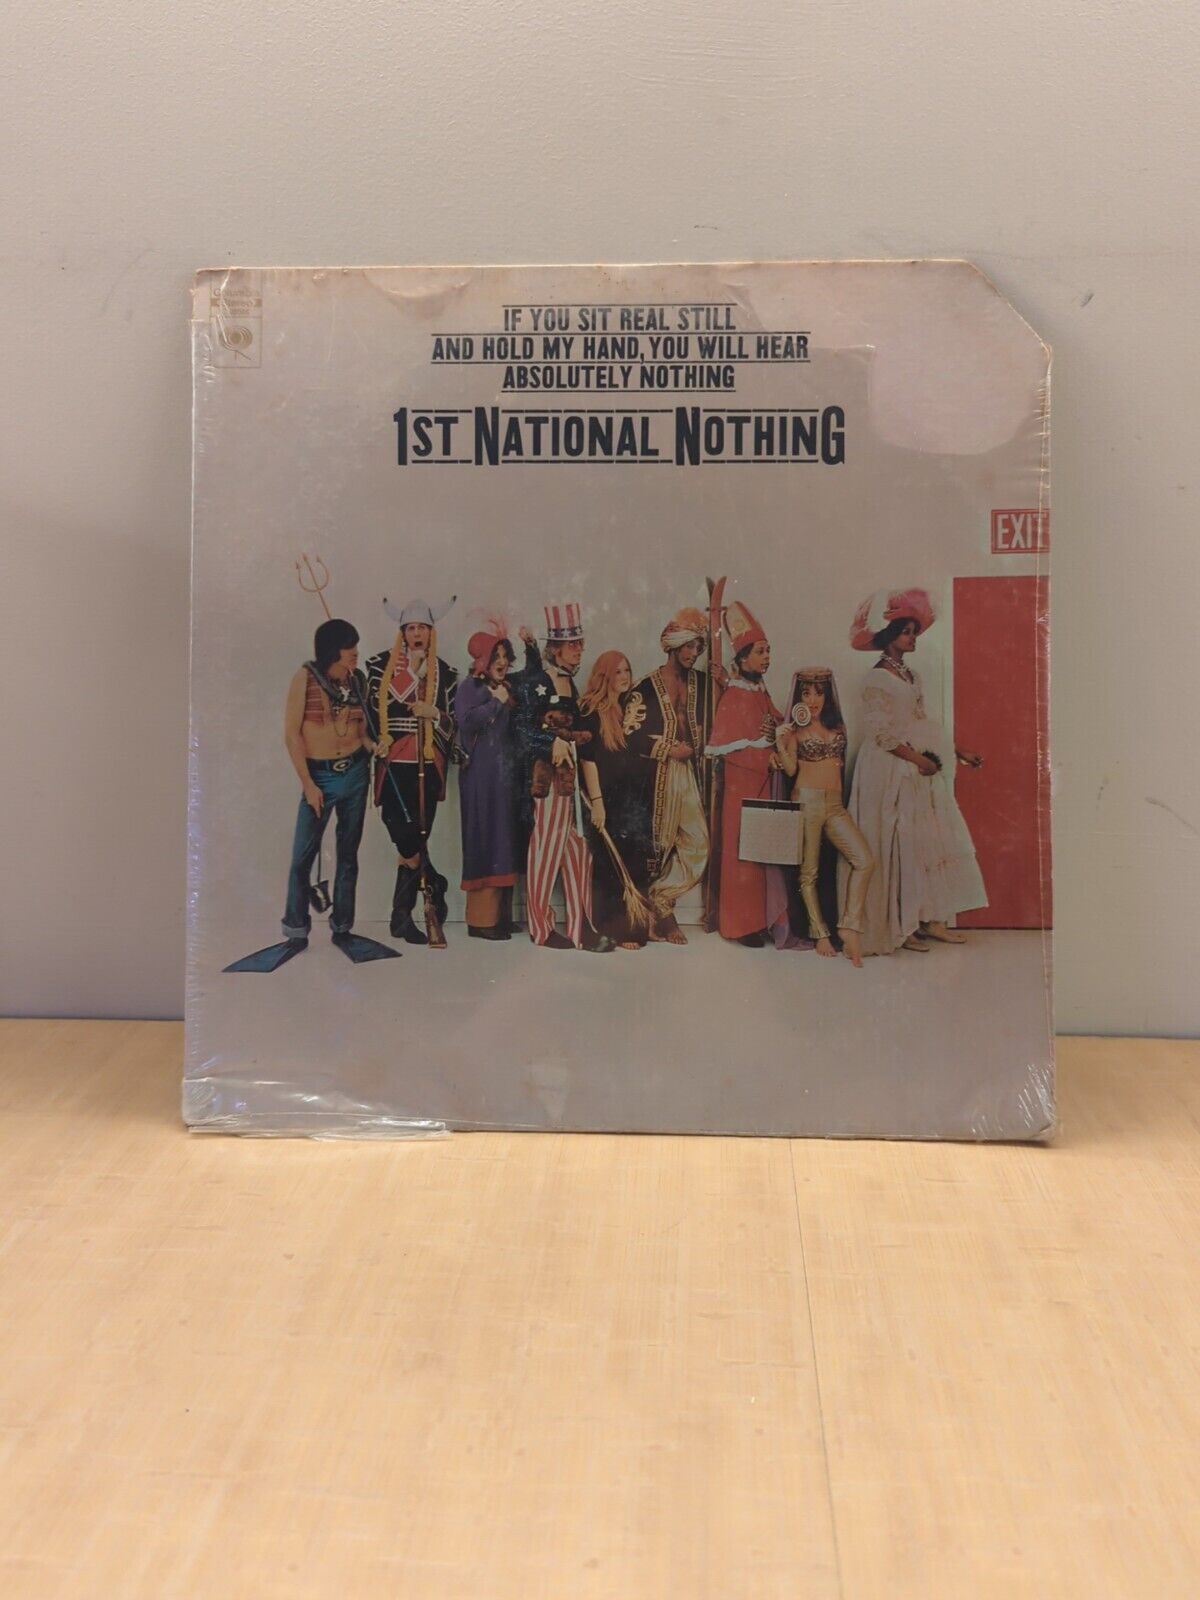 Vinyl LP-1st National Nothing-If You Sit Real Still... SEALED-Record is mint